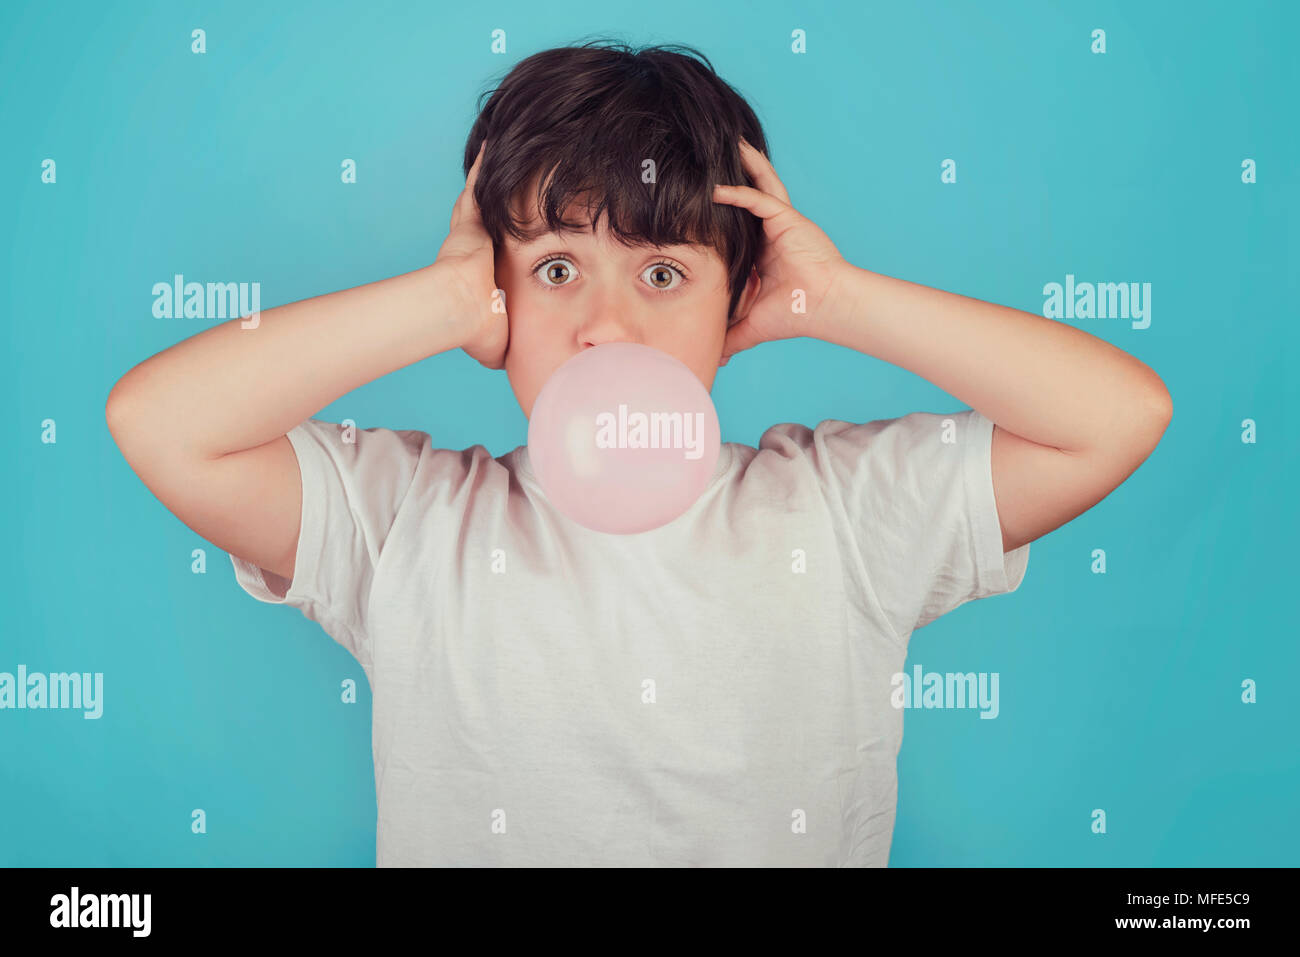 child with chewing gum in your mouth on blue background Stock Photo